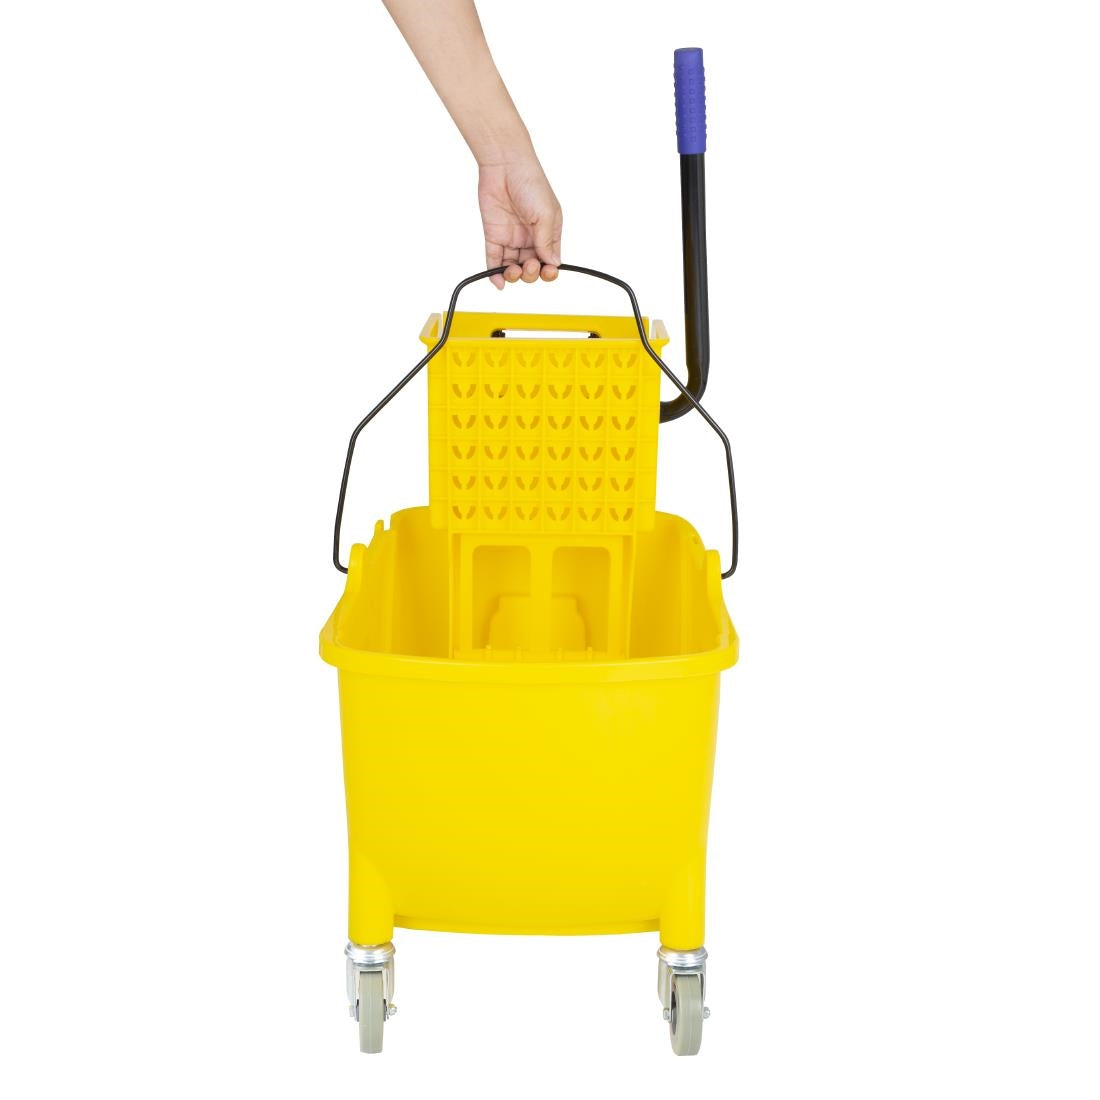 FW866 Jantex 30ltr Mop Bucket with Foot Pedal release - Yellow